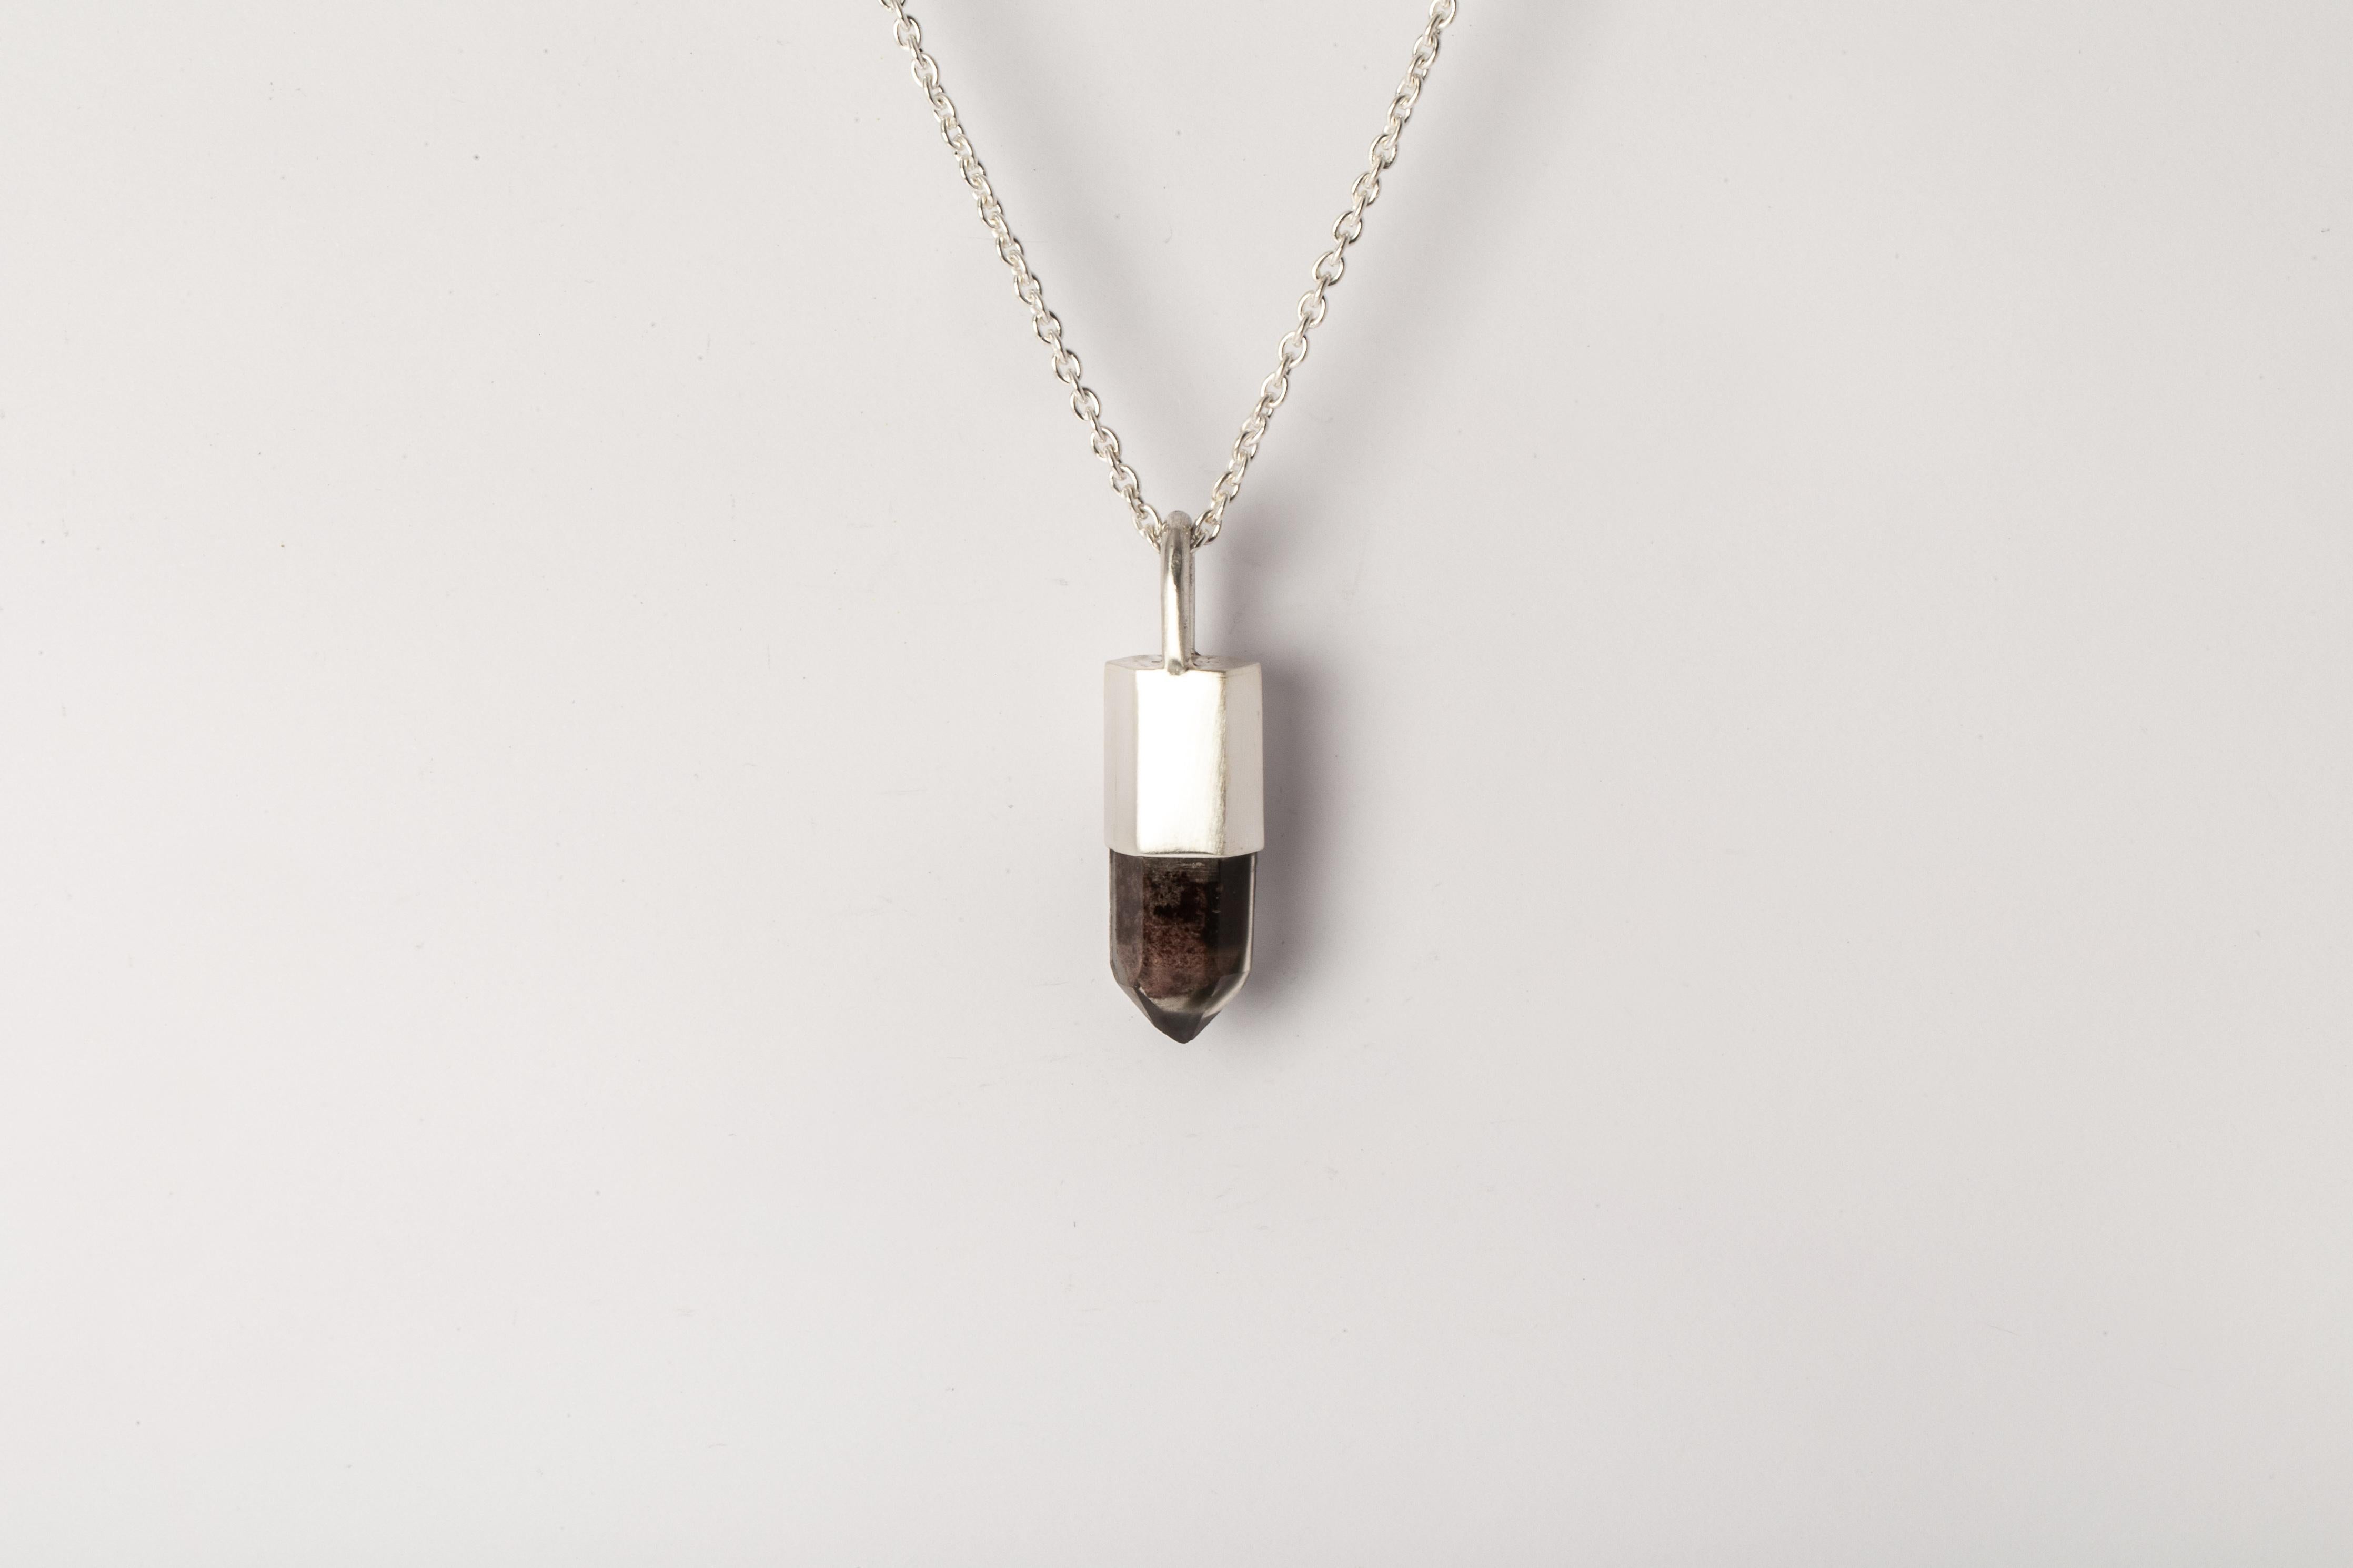 Pendant necklace made in matte sterling silver and a hexagon cut of Garden Quartz. It comes on 74 cm sterling silver chain.
The Talisman series is an exploration into the power of natural crystals. The crystals used in these pieces are discovered